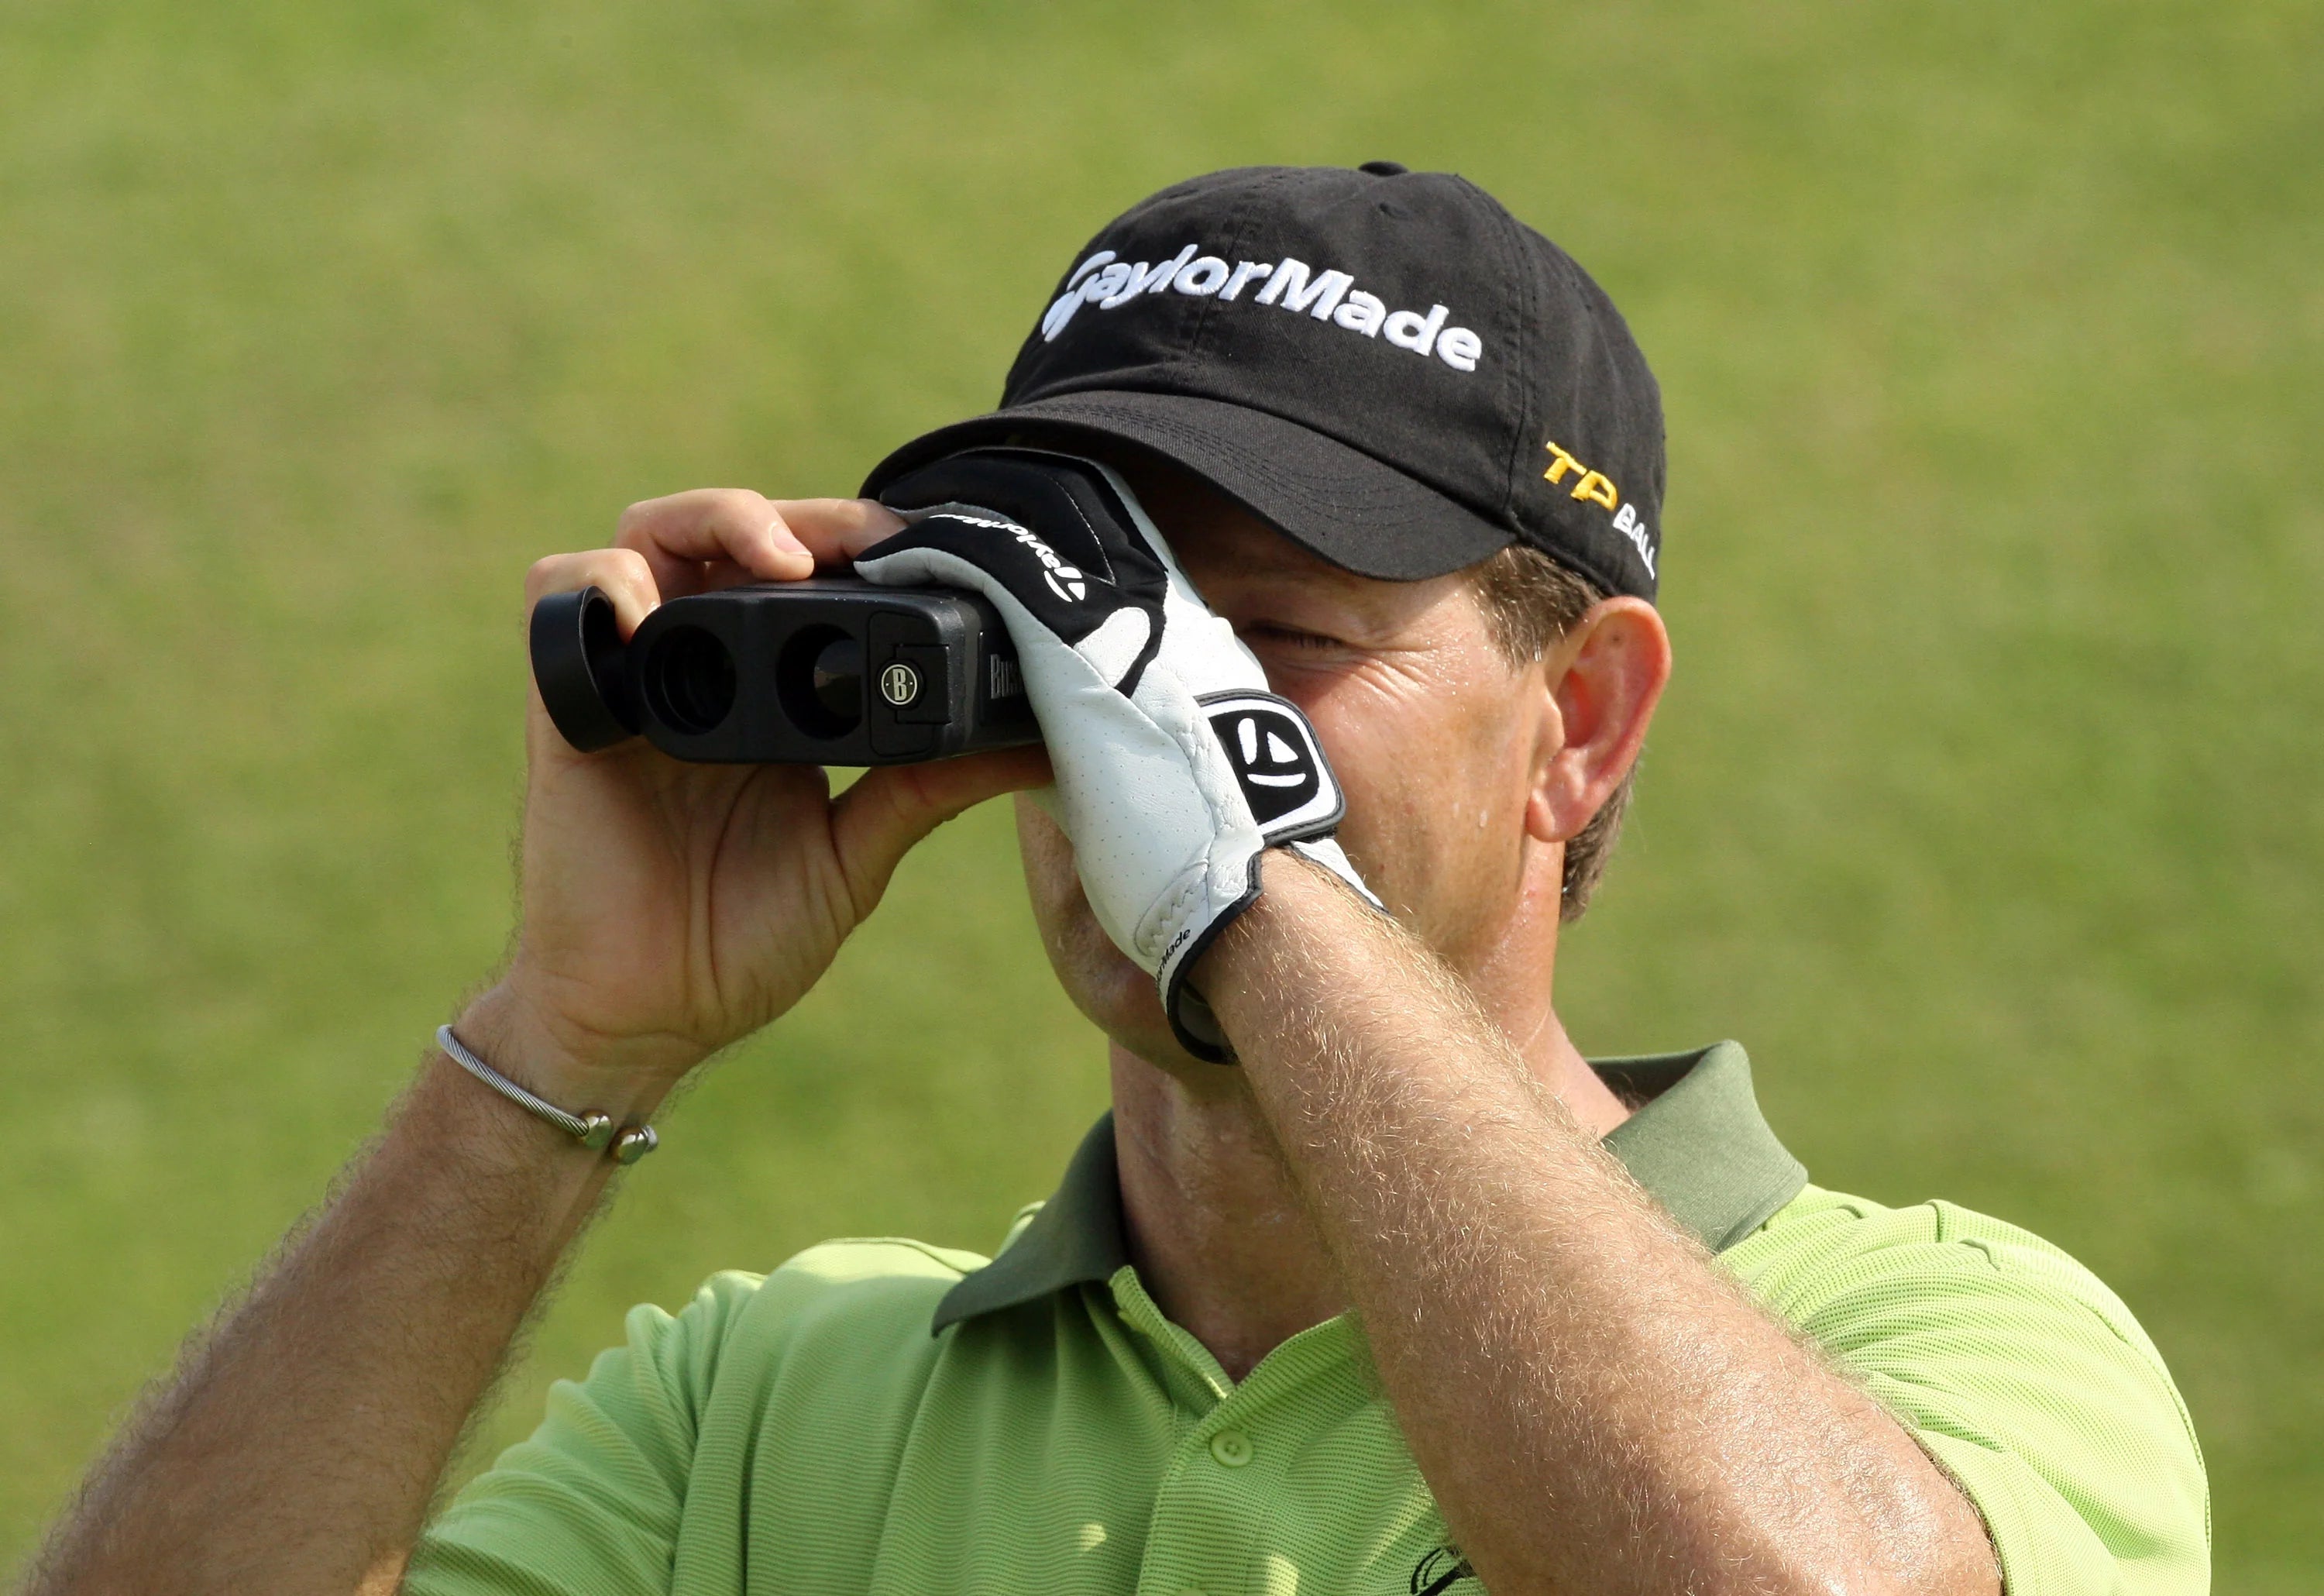 The benefits of using a golf rangefinder on the course